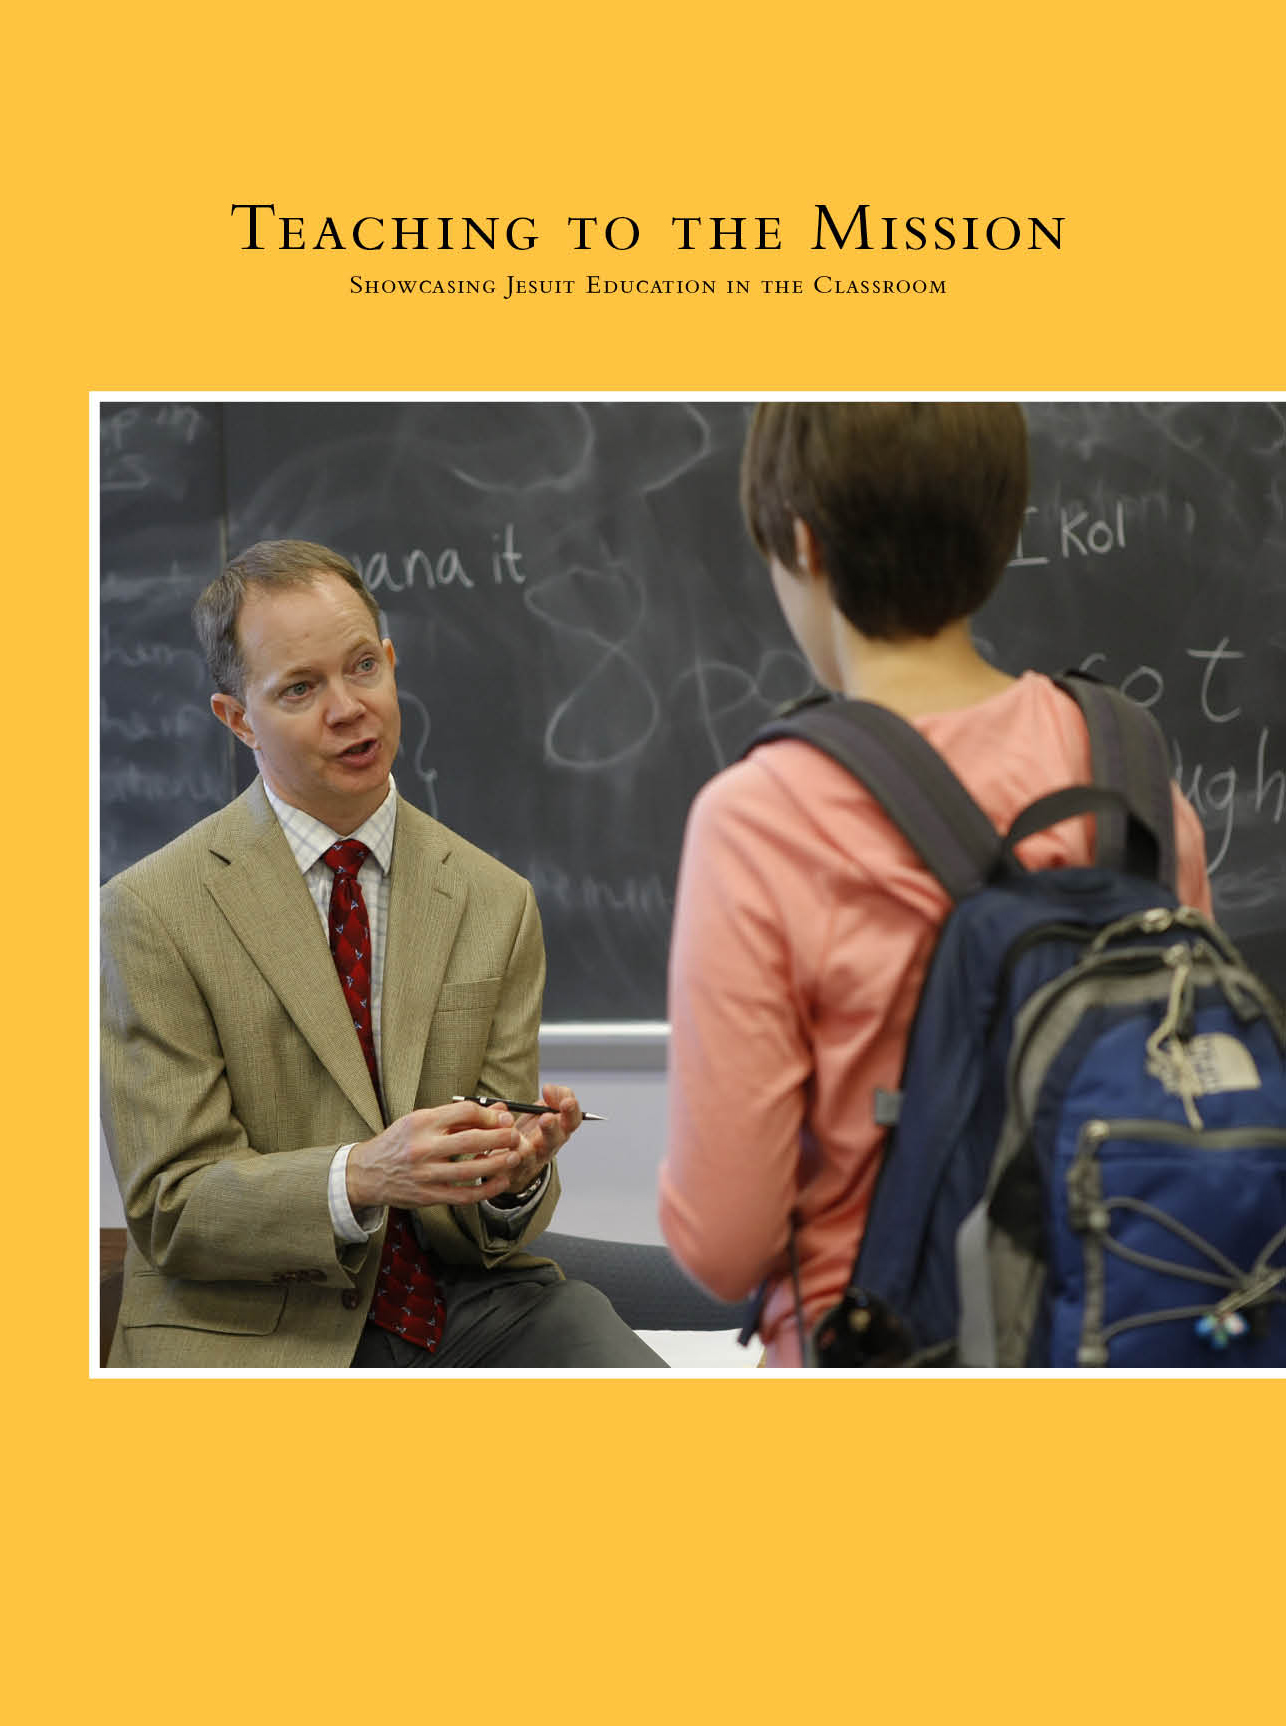 Cover for Teaching to the Mission publication